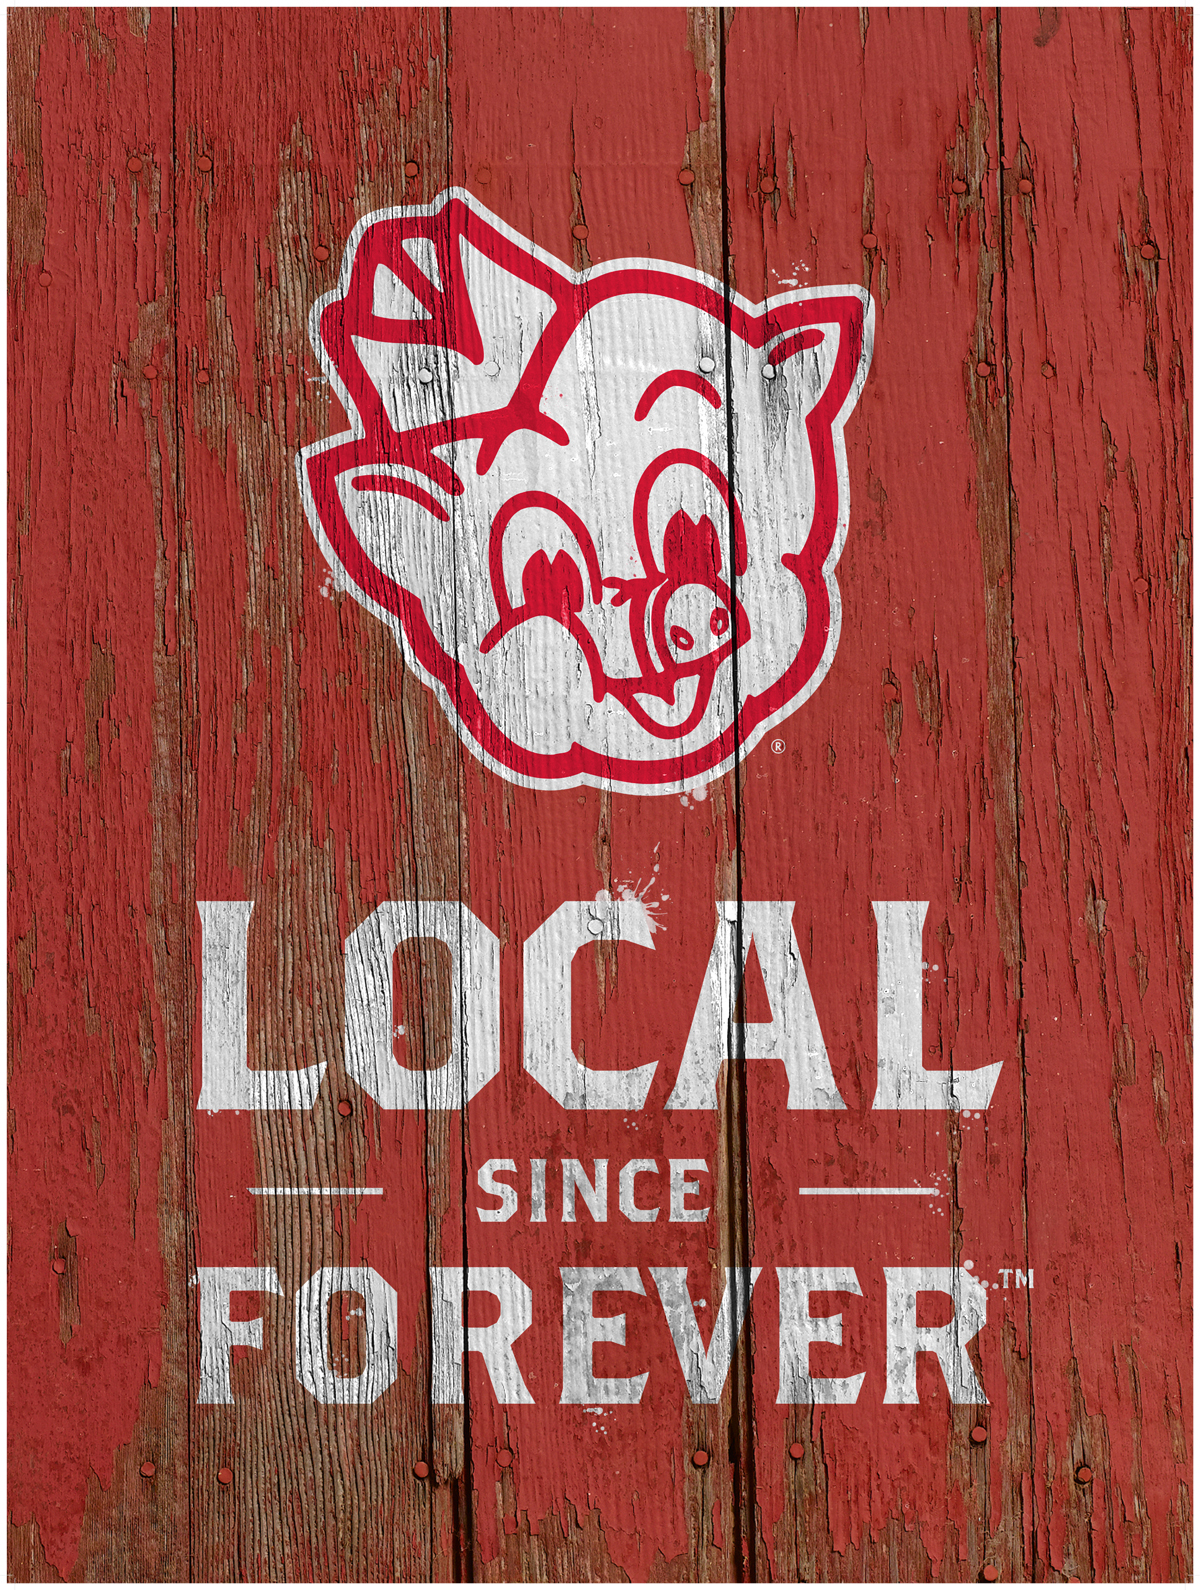 Piggly Wiggly  signs  typography texture wood